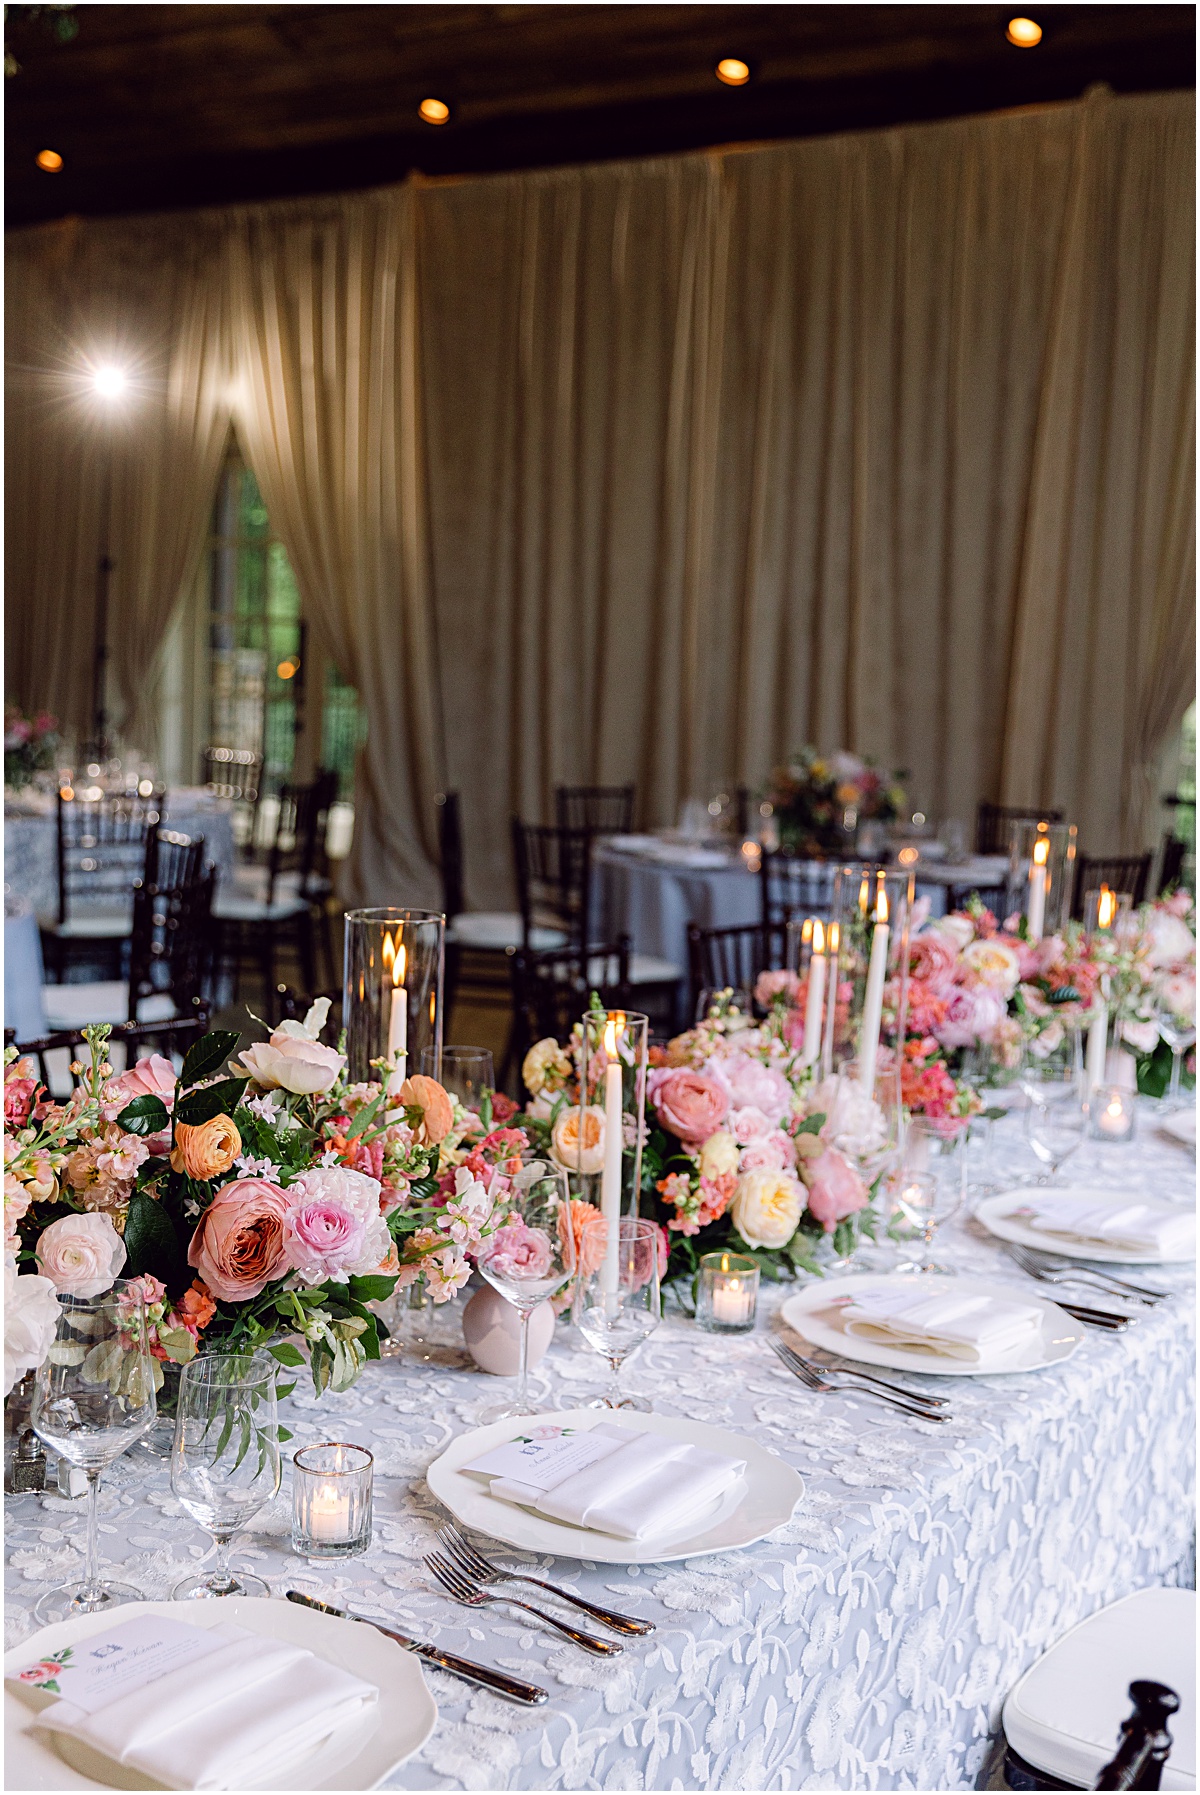 Head table florals by Holly Chapple. Joyful summer wedding at the Inn at Willow Grove by Sarah Bradshaw. Planning by Kelley Cannon Events.